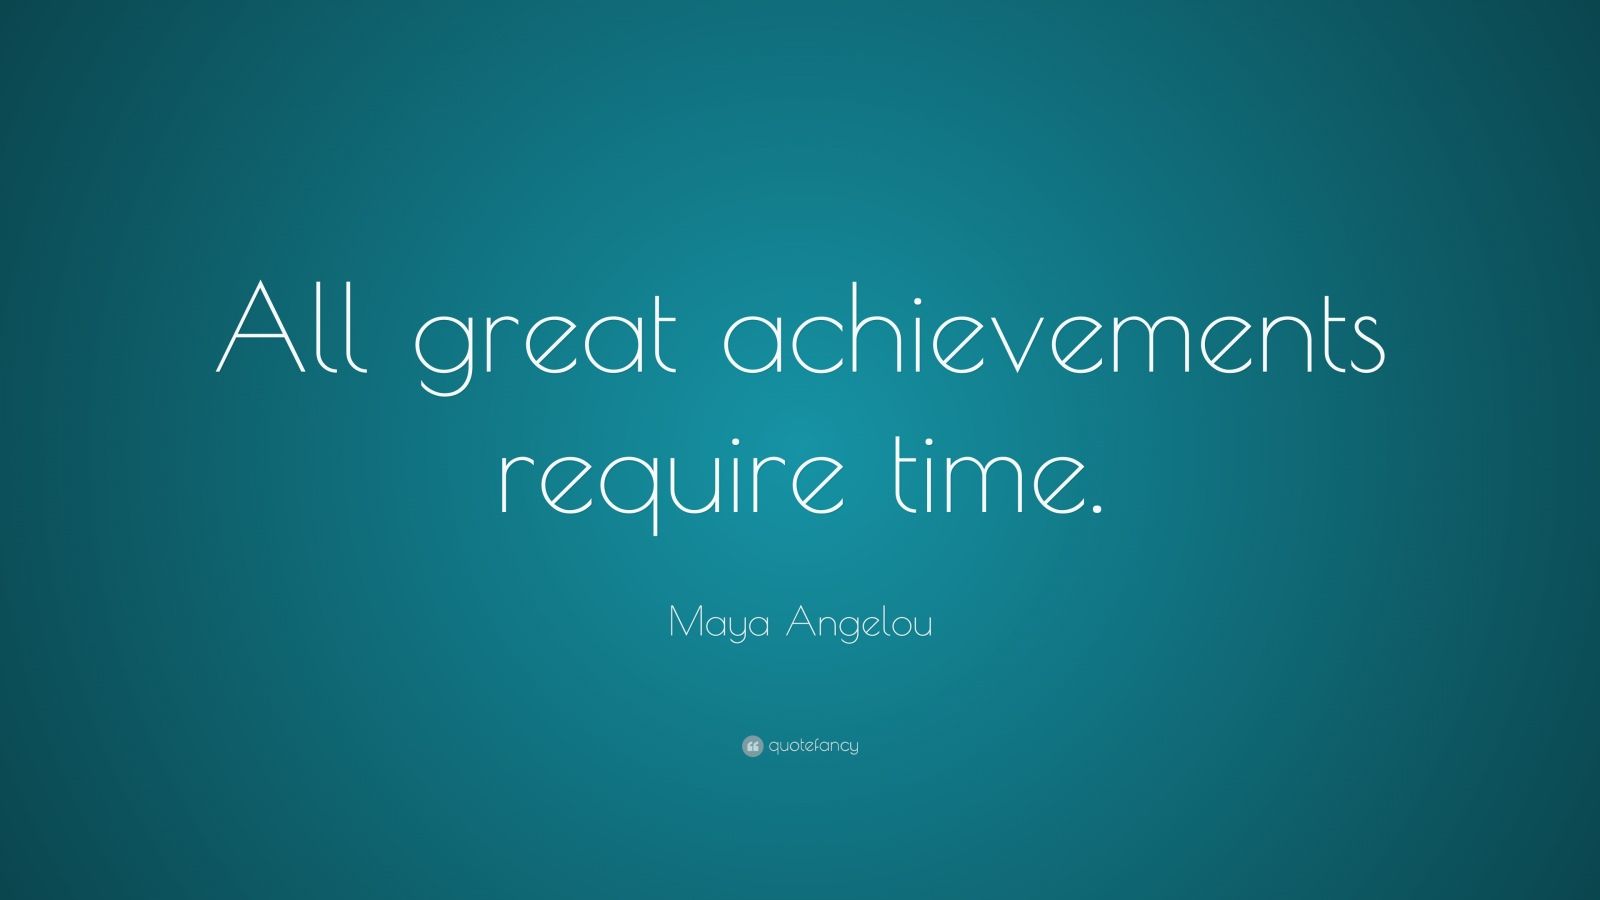 Maya Angelou Quote: “All great achievements require time.” (24